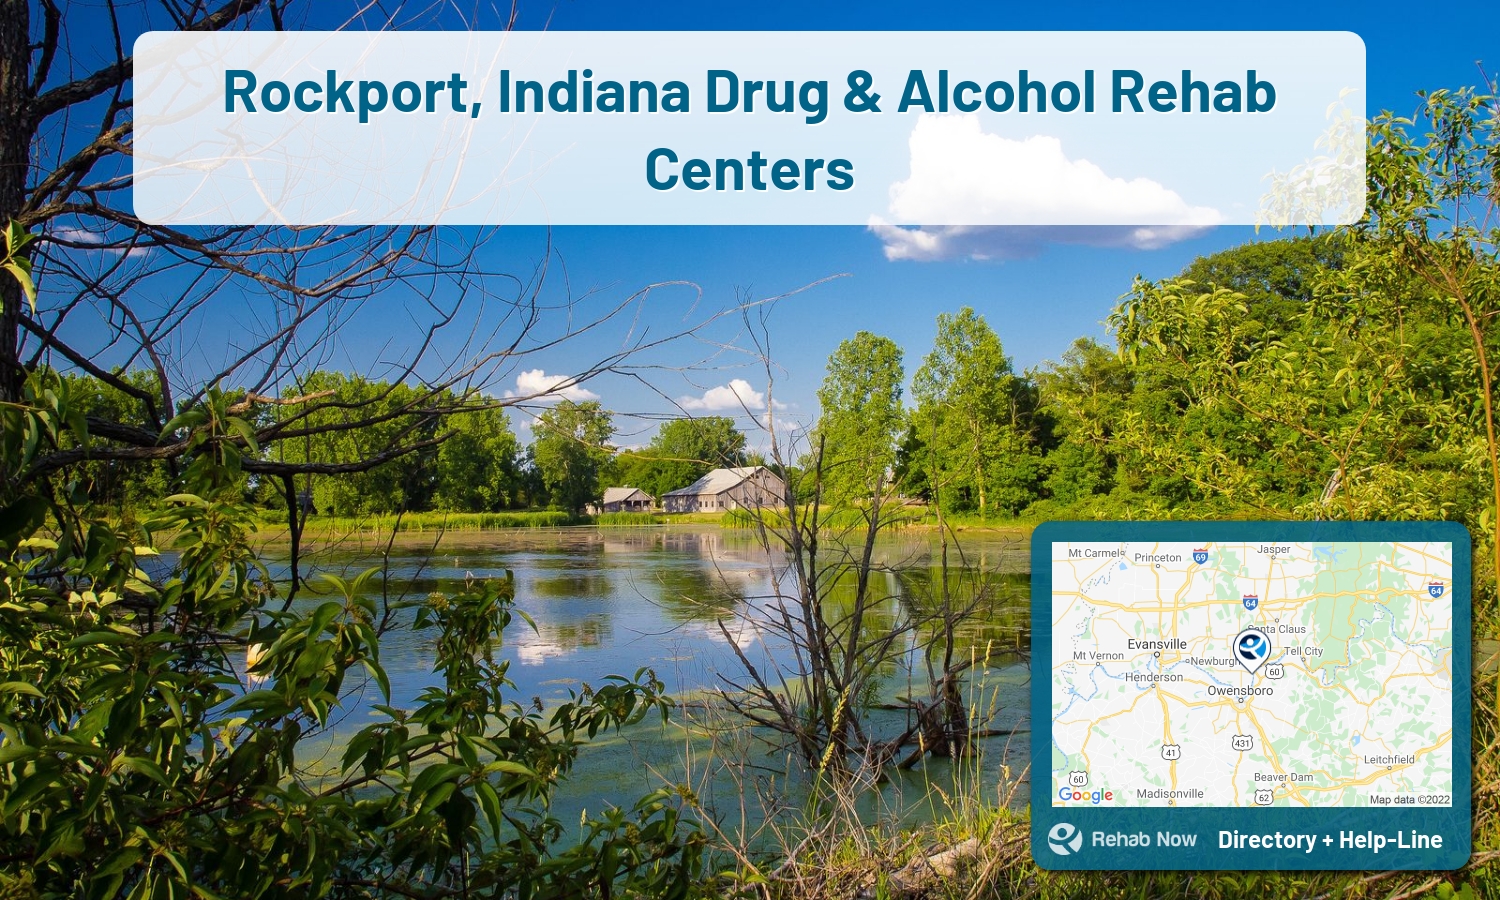 Rockport, IN Treatment Centers. Find drug rehab in Rockport, Indiana, or detox and treatment programs. Get the right help now!